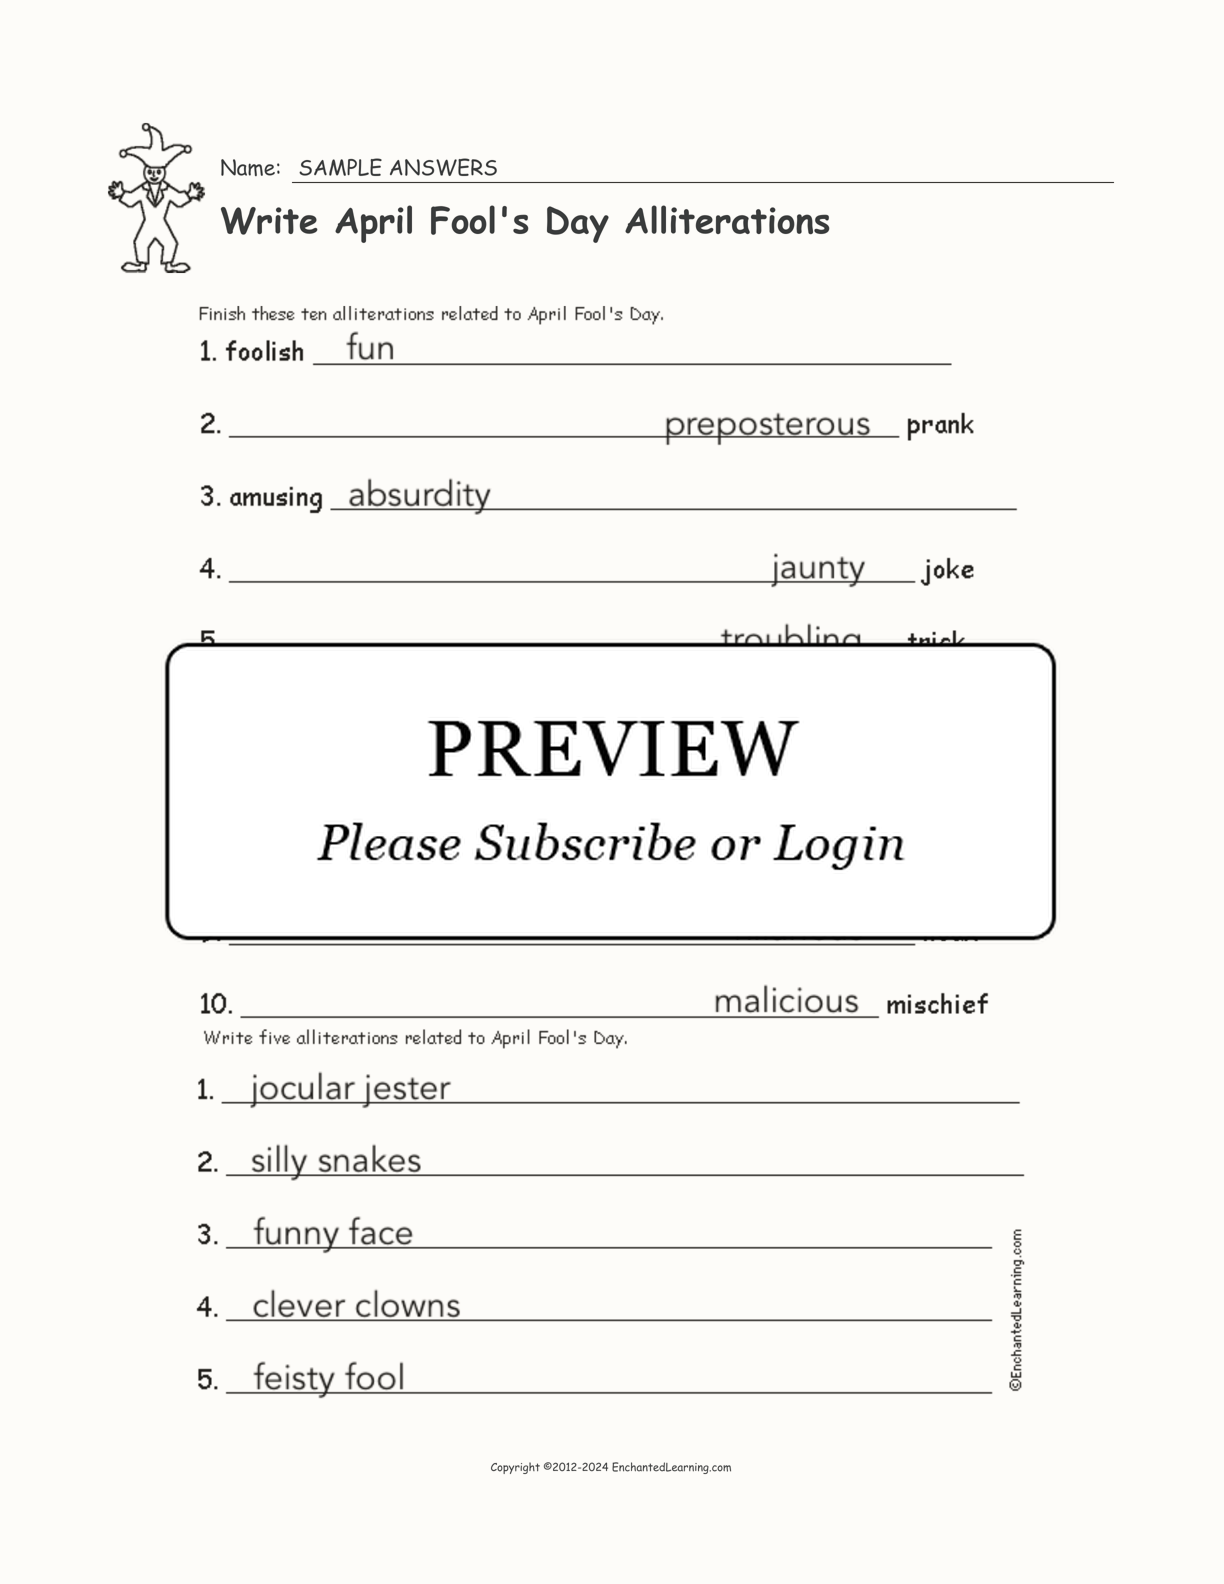 Write April Fool's Day Alliterations interactive worksheet page 2